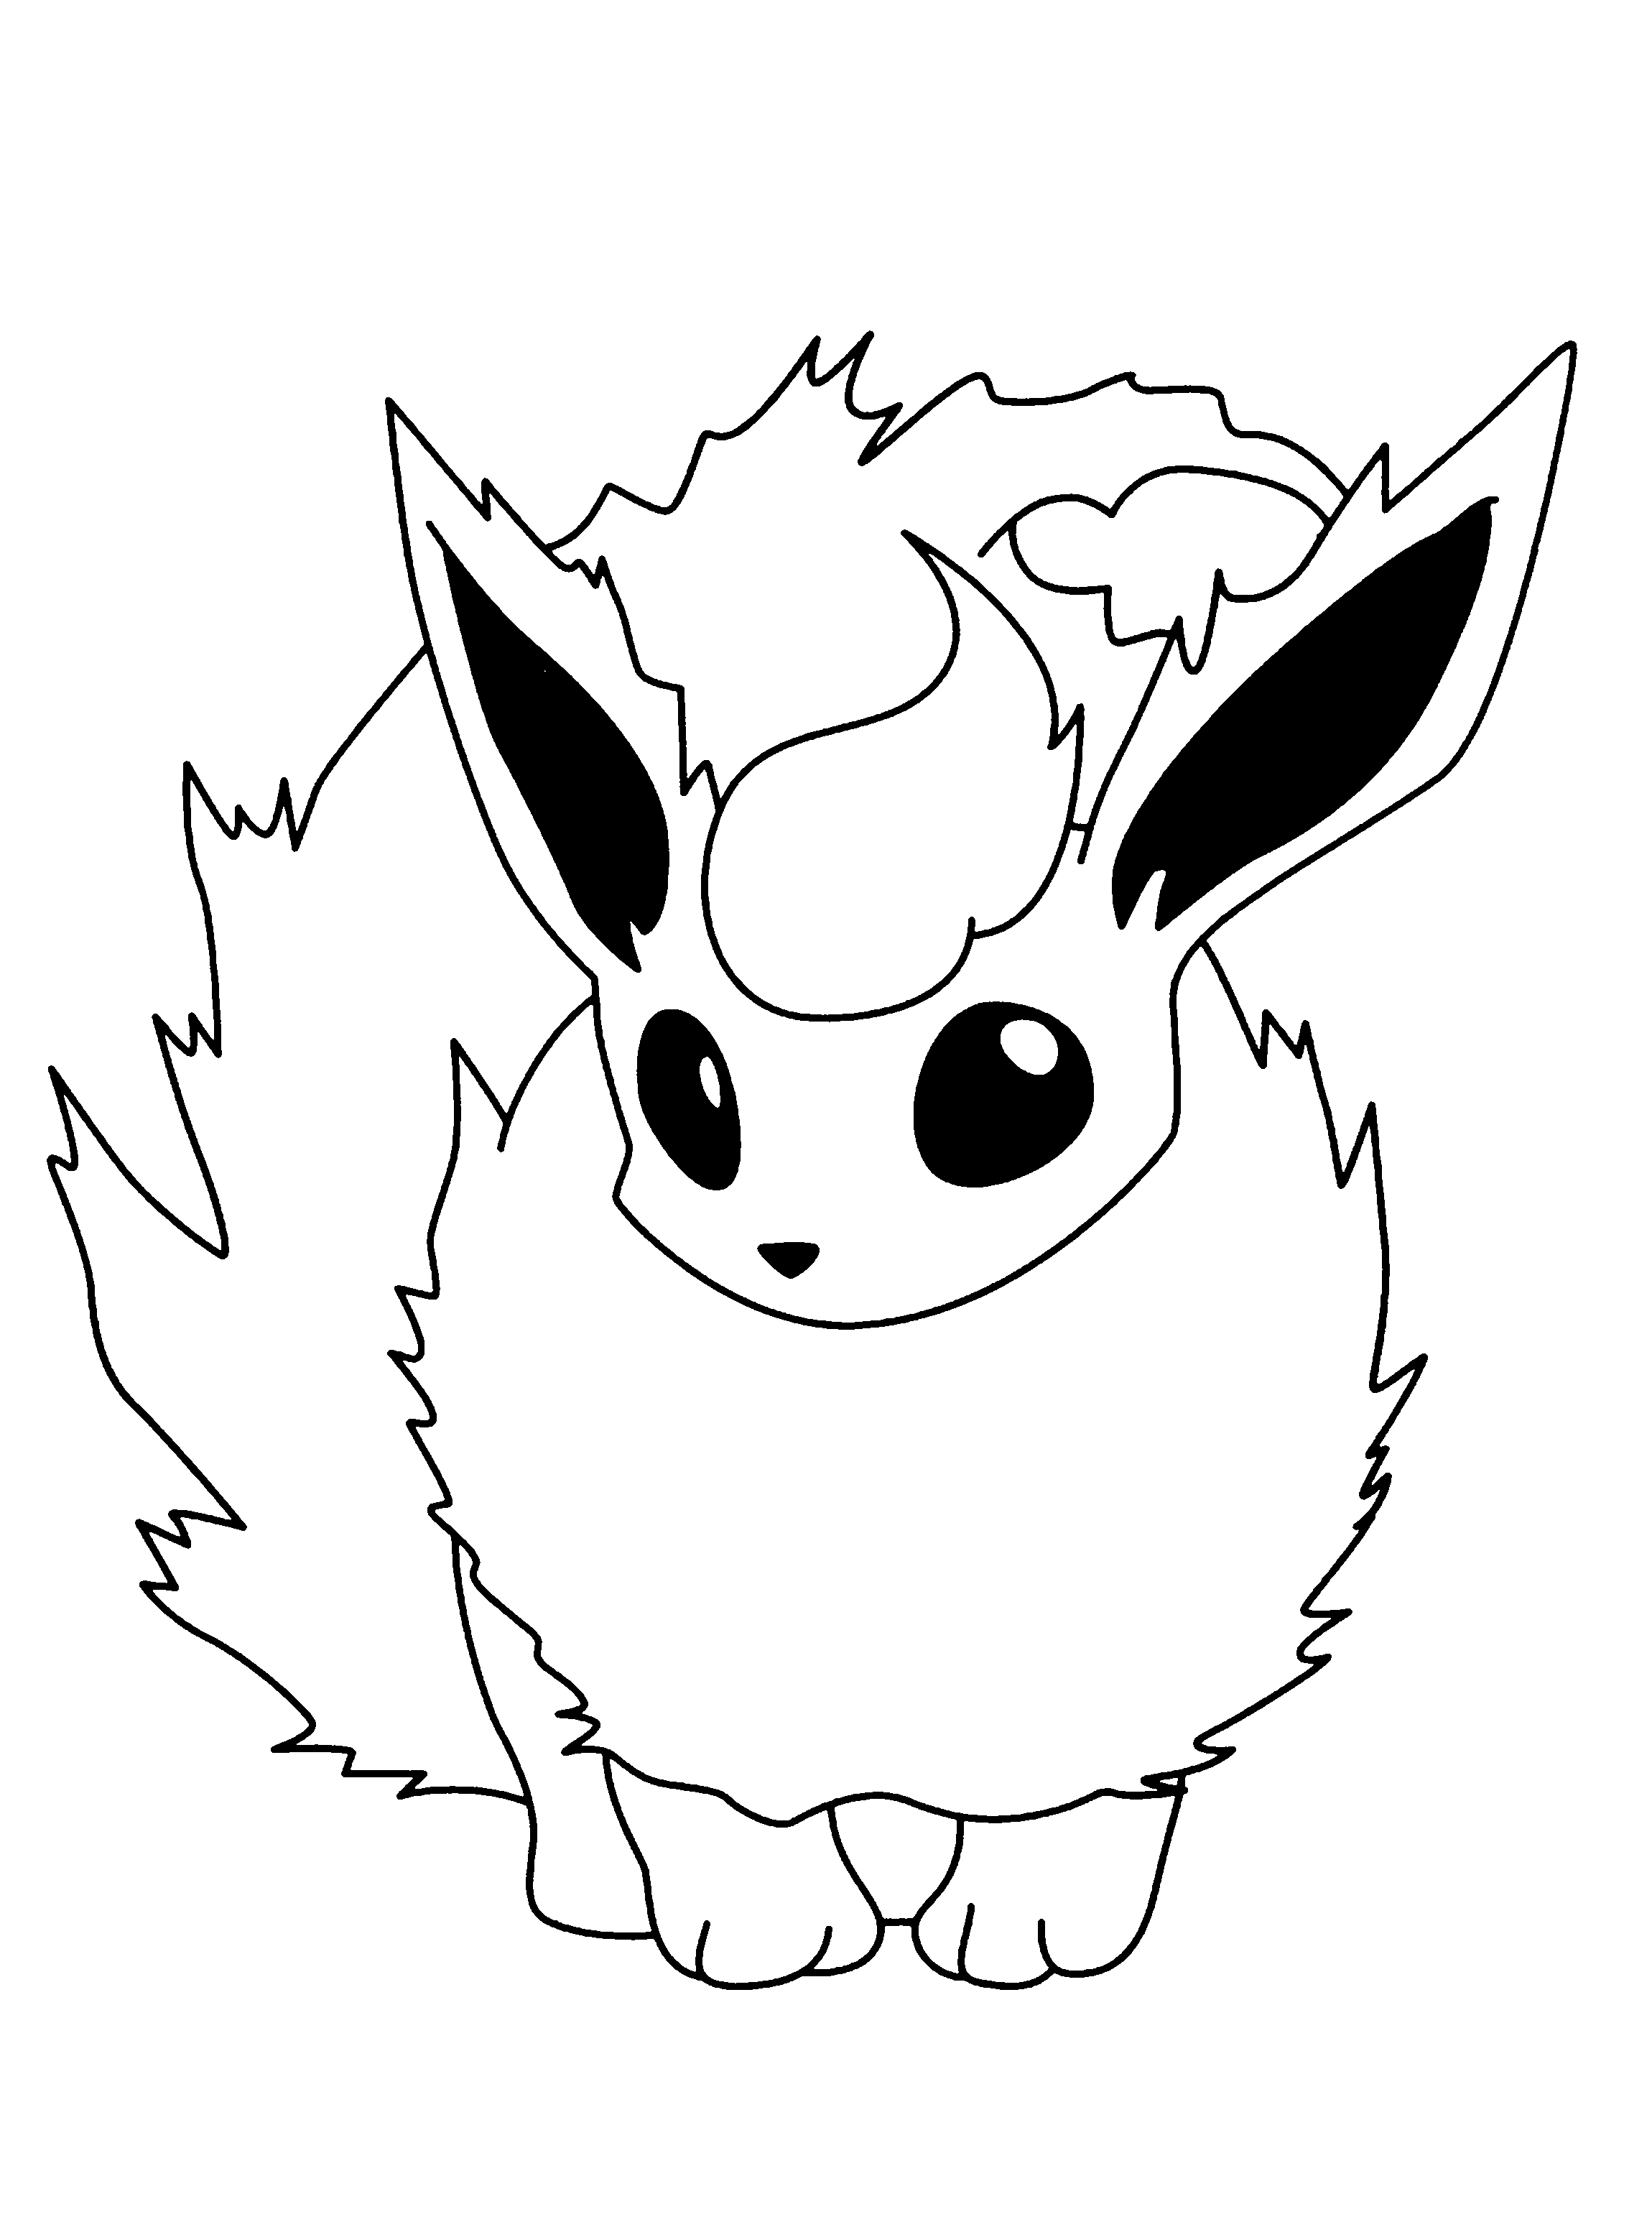 Printable Pokemon Coloring Pages Eevee Evolutions 3285 - Pokemon    Pokemon coloring pages, Pokemon coloring, Coloring pages inspirational